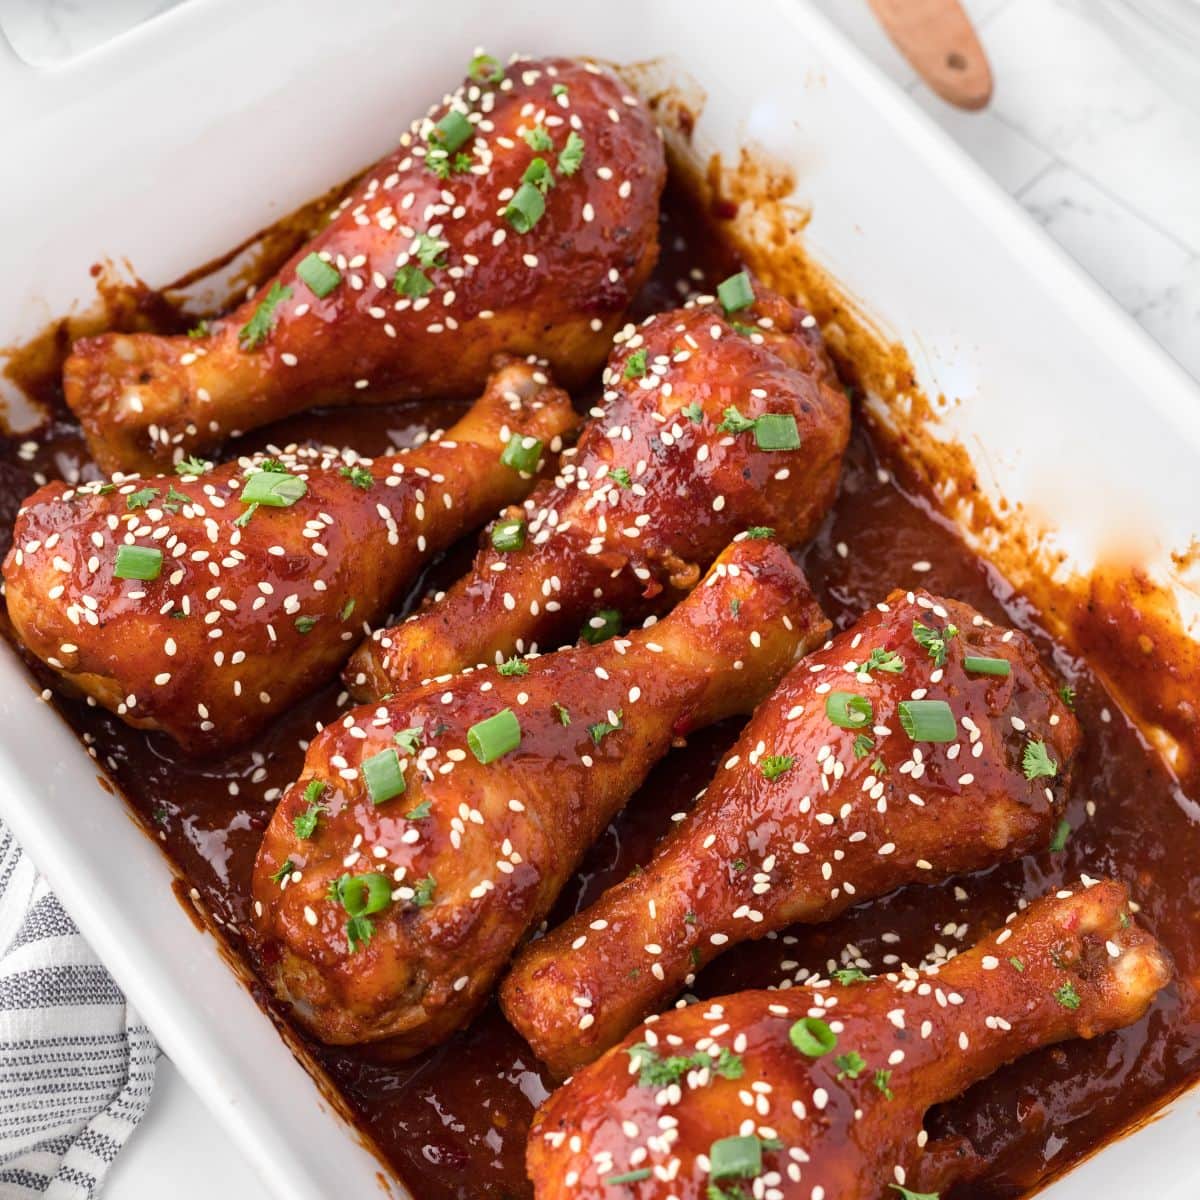 6 bbq drumsticks in a sweet bbq sauce baked in a white casserole dish.